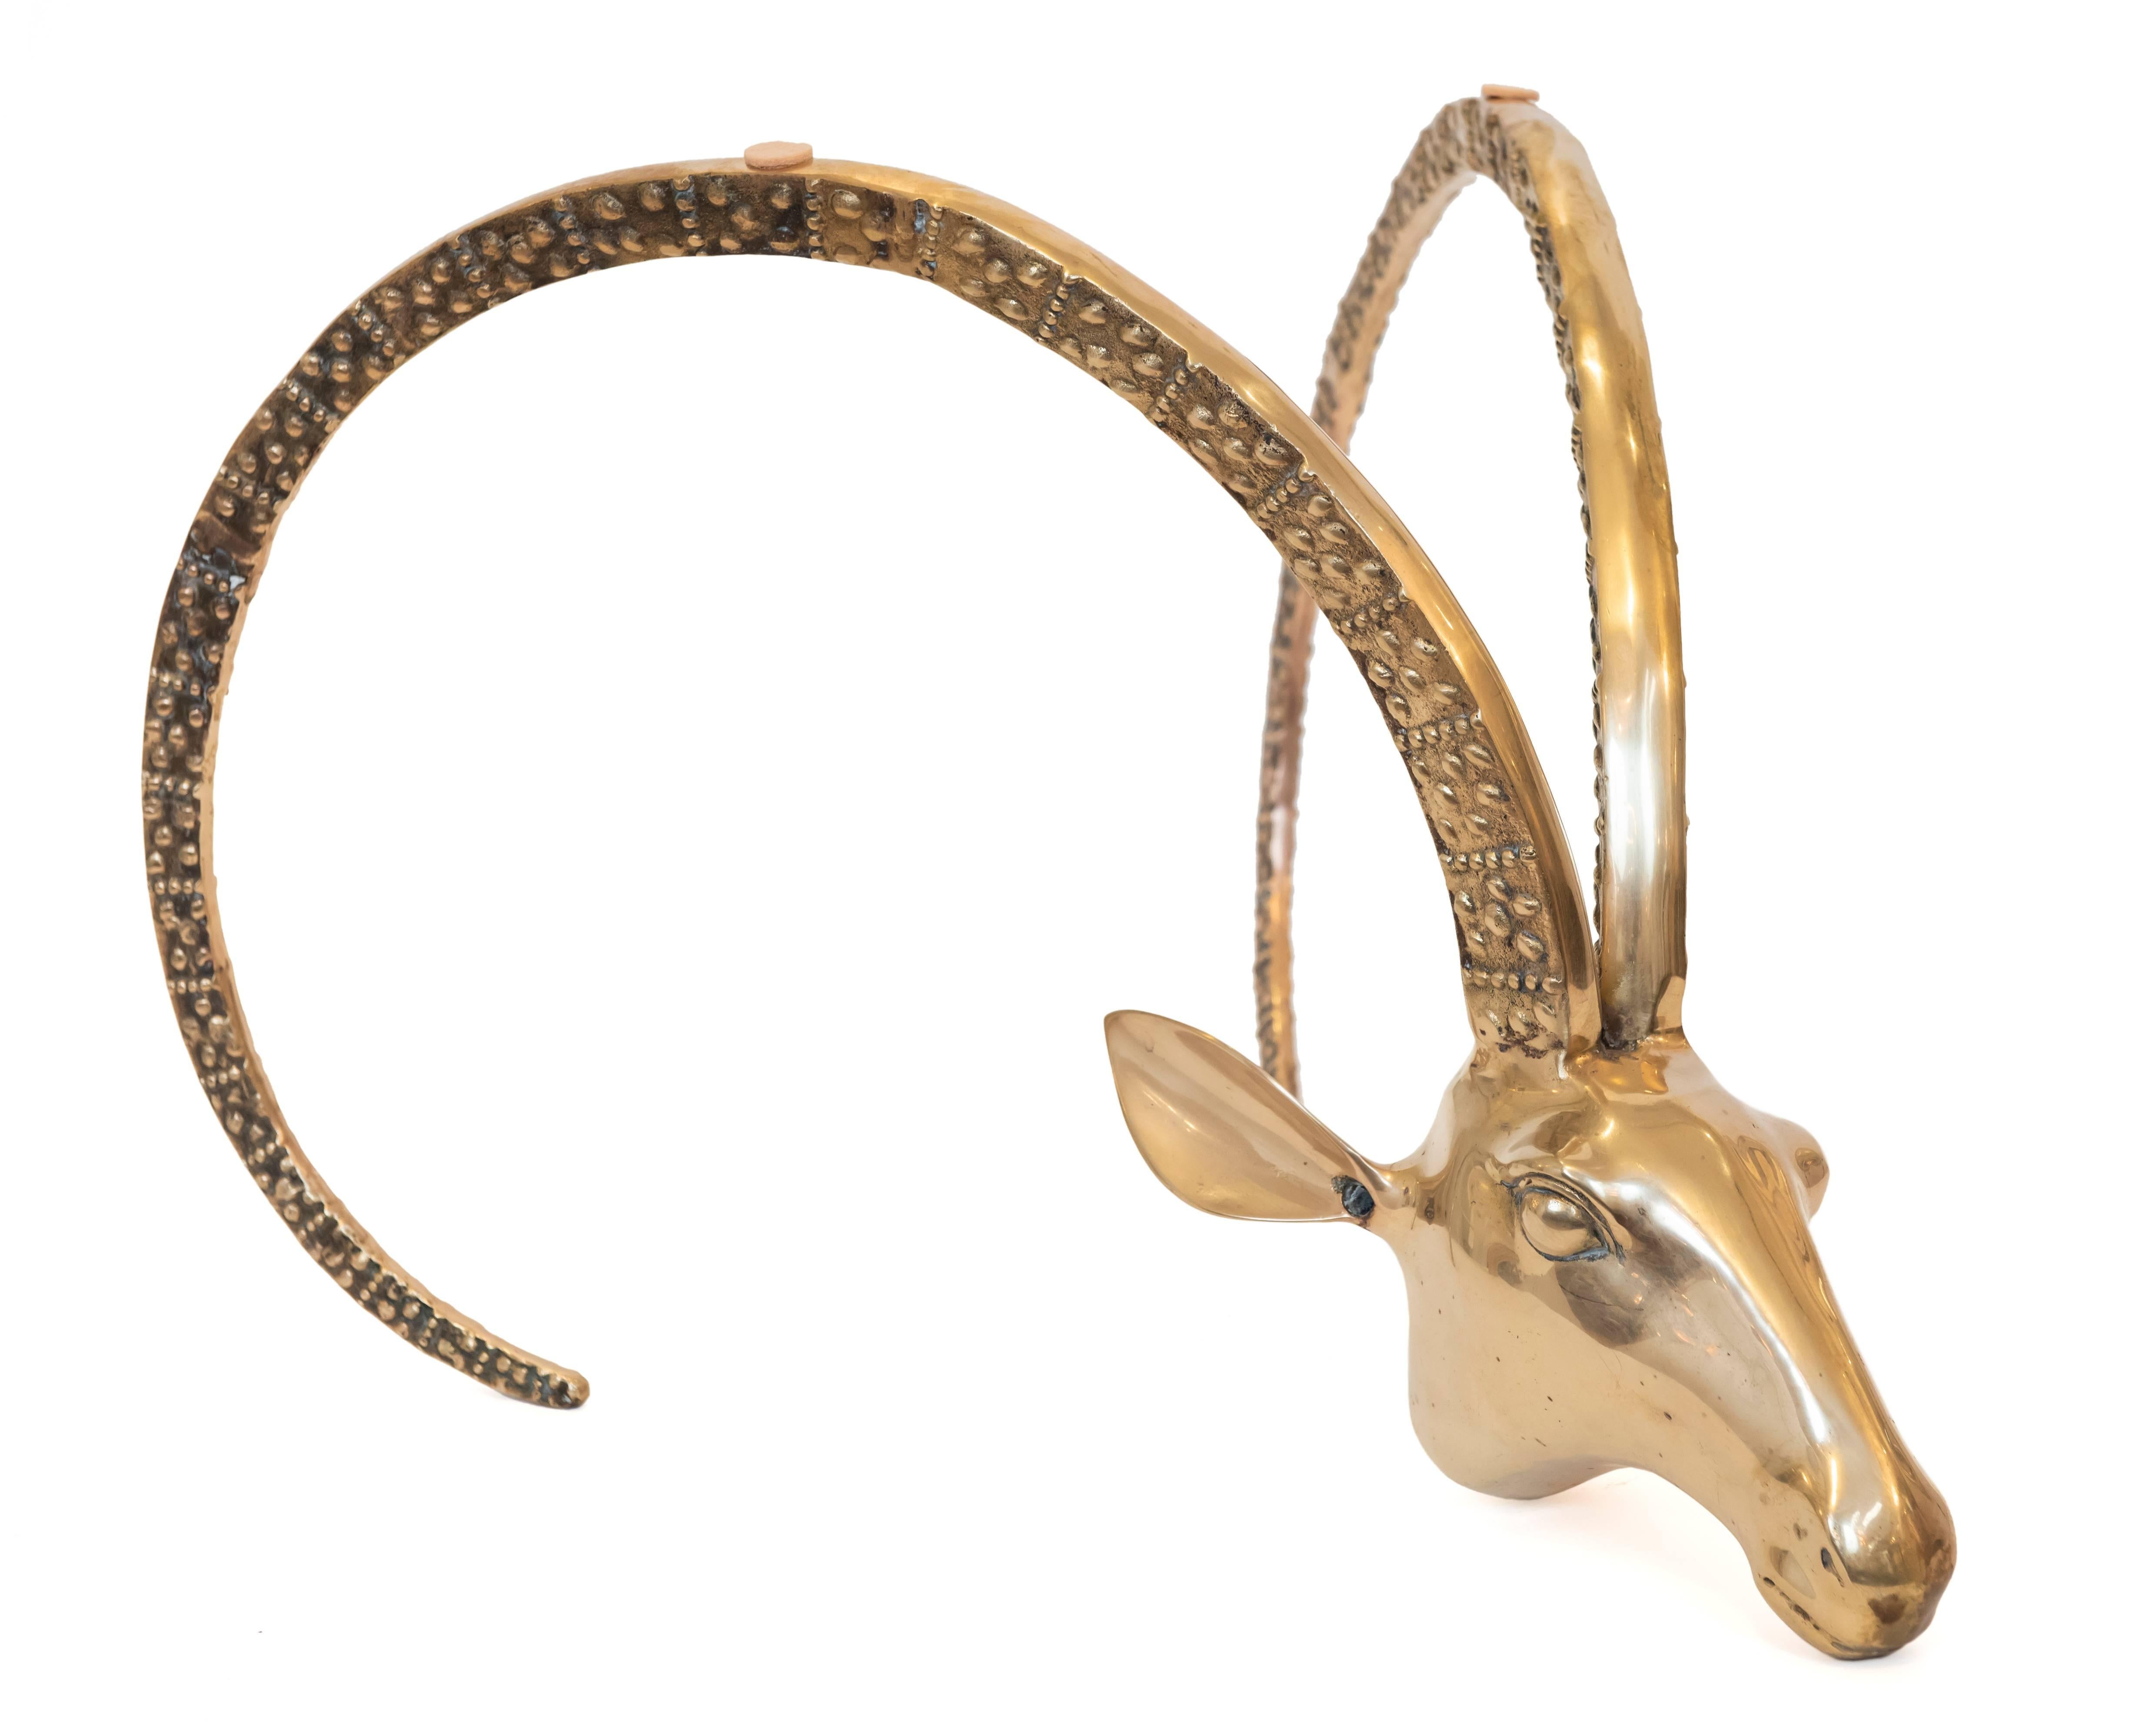 These classic and graceful decorative brass ibex or ram's head coffee table bases with patterned antlers are stylish additions to any decor. Just add a
glass to size and voila!